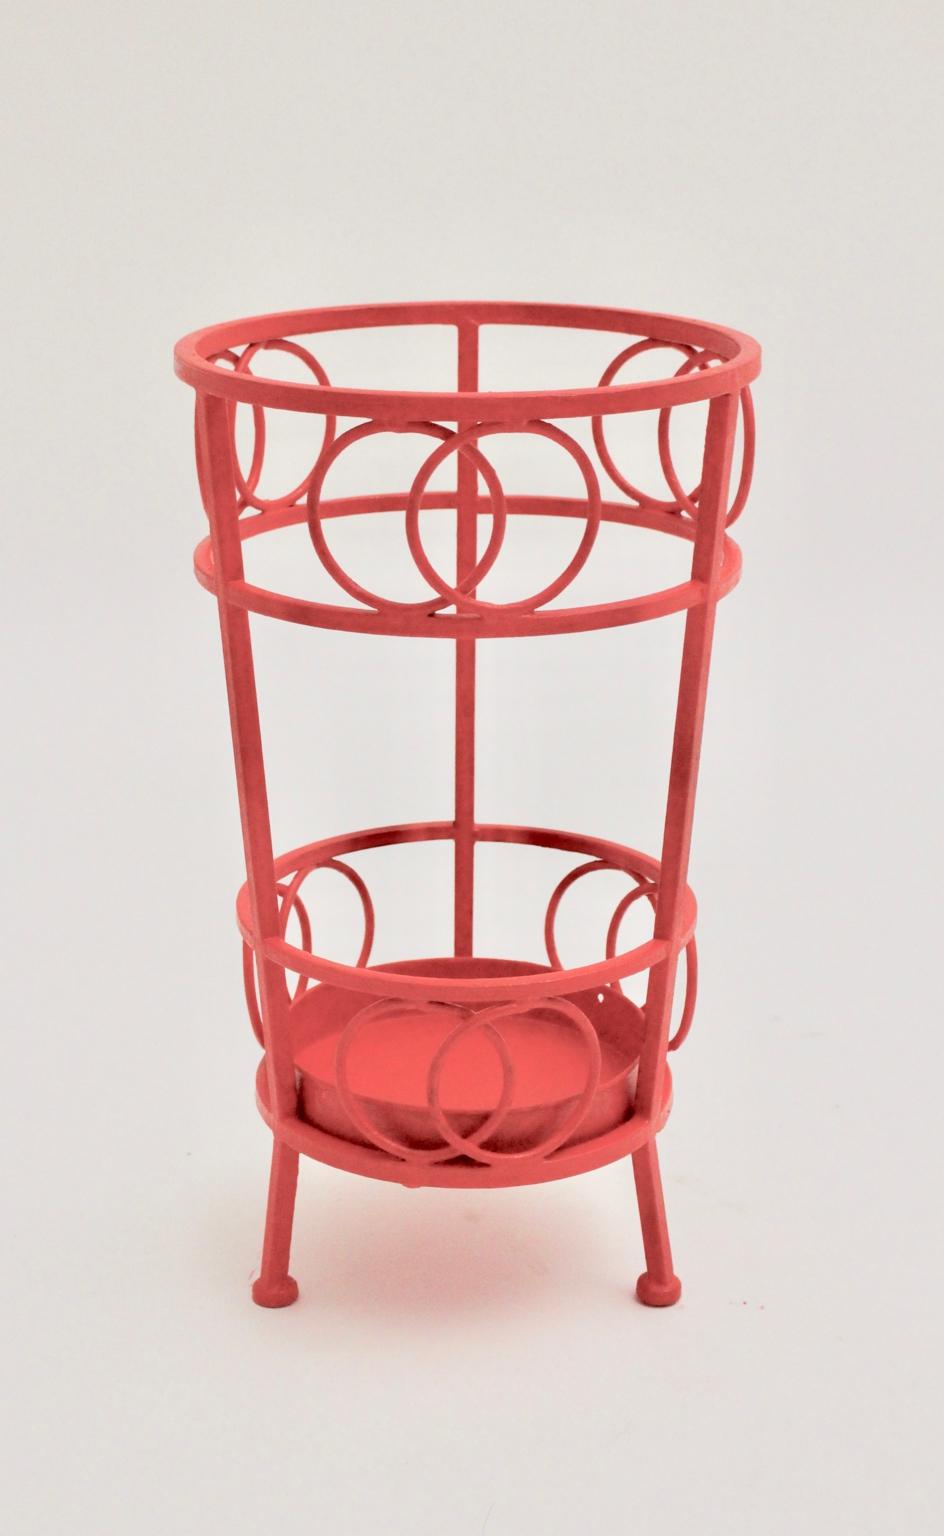 This umbrella stand was designed and made in Austria, circa 1970.
Also the umbrella stand was made of metal and is new lacquered in the color cherry red. Additionally the piece is decorated with round shaped elements and shows a removable drip